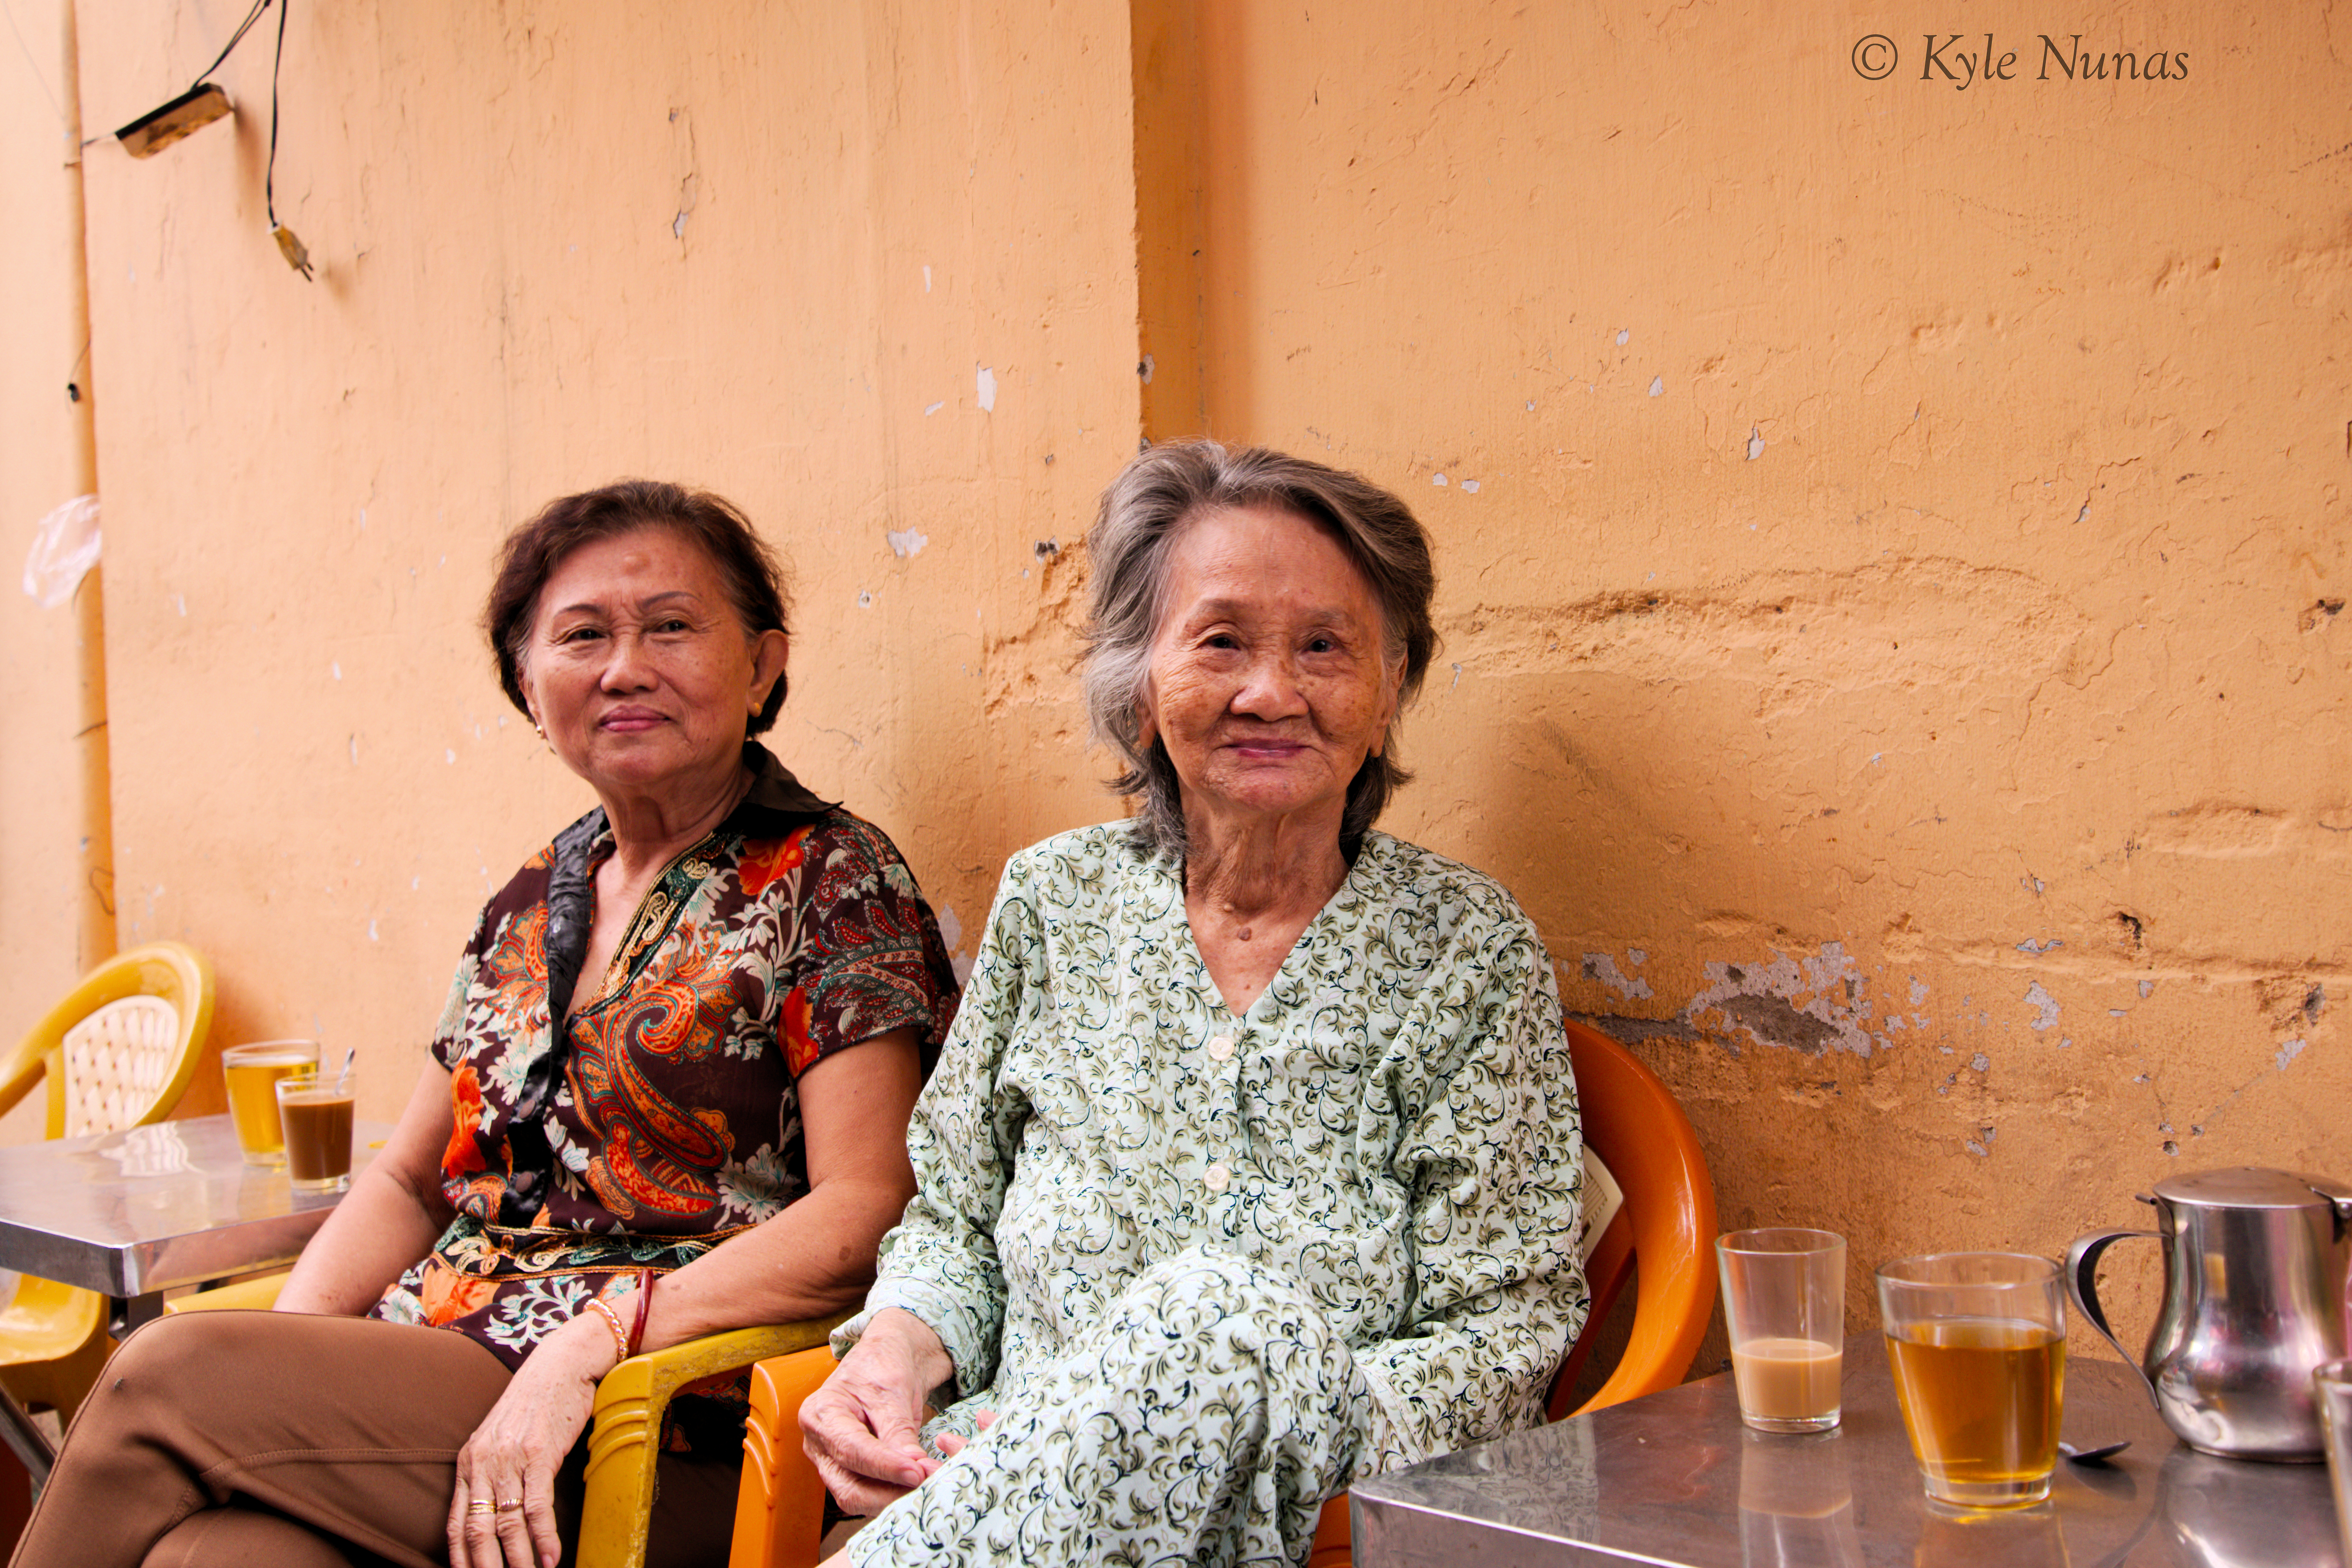 Two women who are having coffee down an alley in Vietnam smile for a photo taken by Kyle Nunas in July 2020.